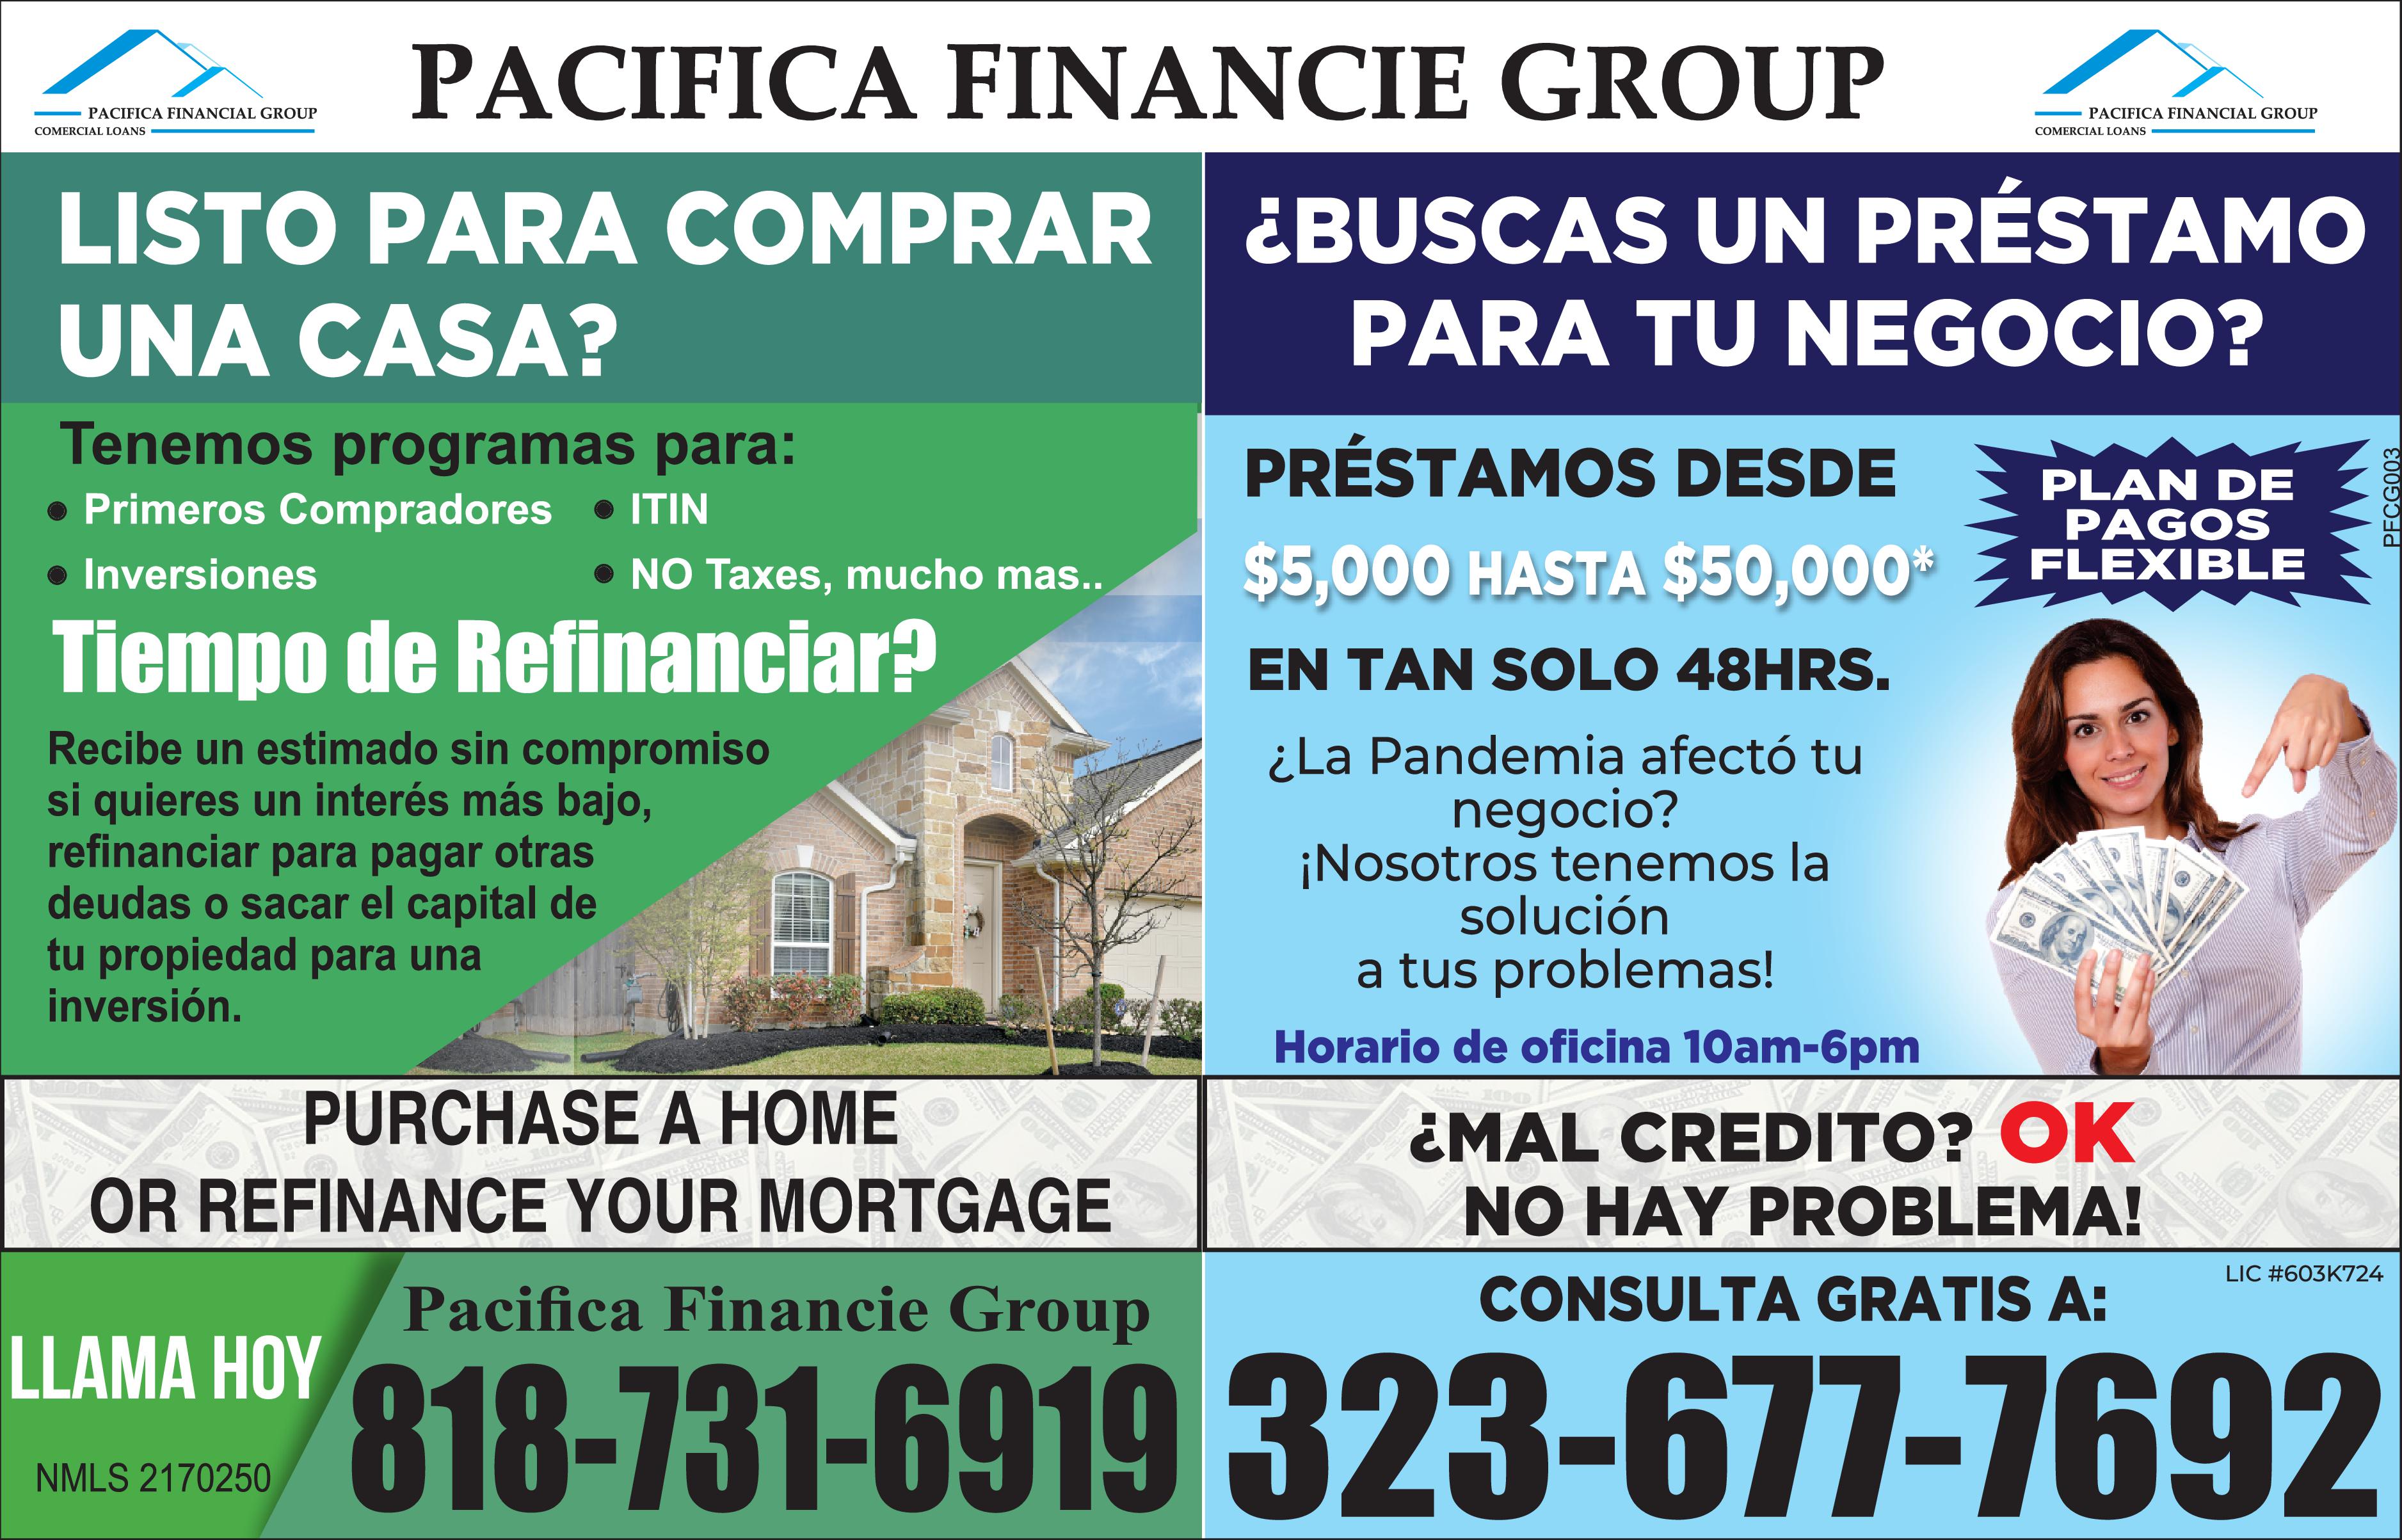 Pacifica Financial Group